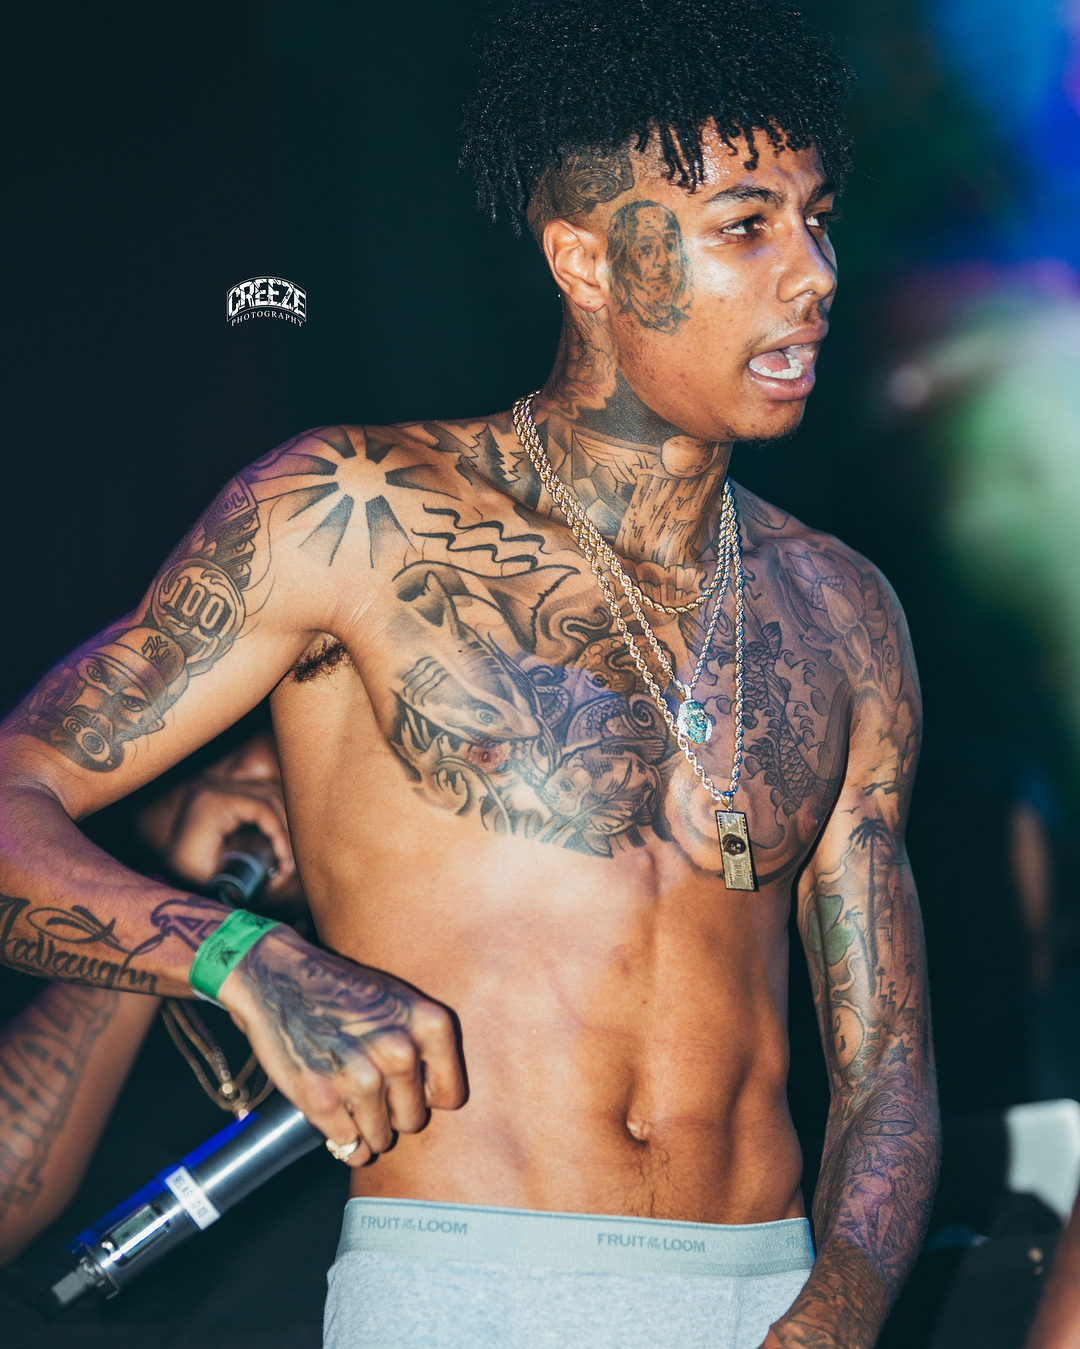 Blueface fans only